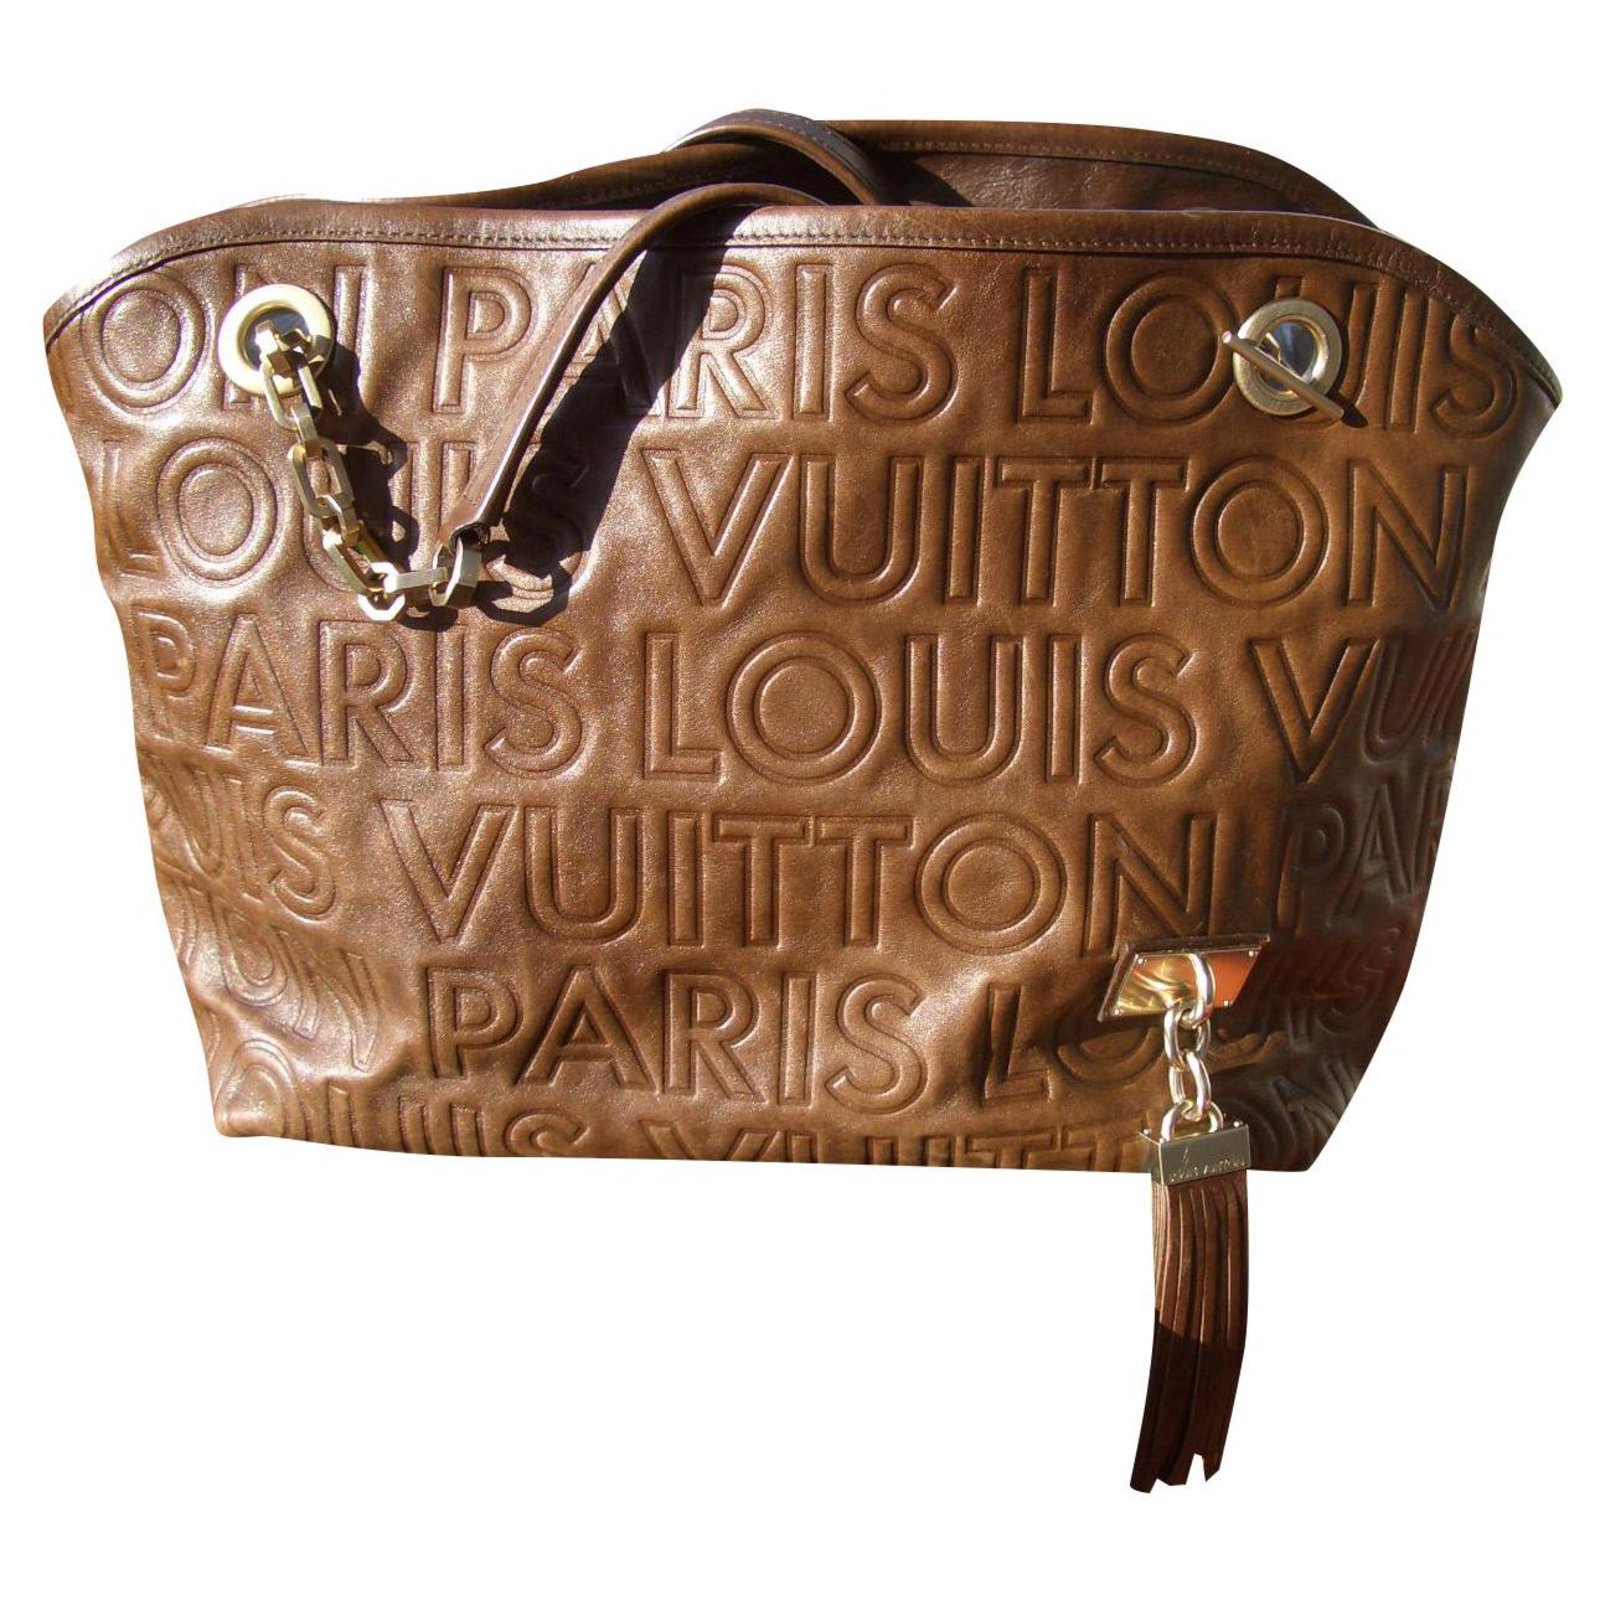 Lv Collection Automne Hiver 2008 Bag